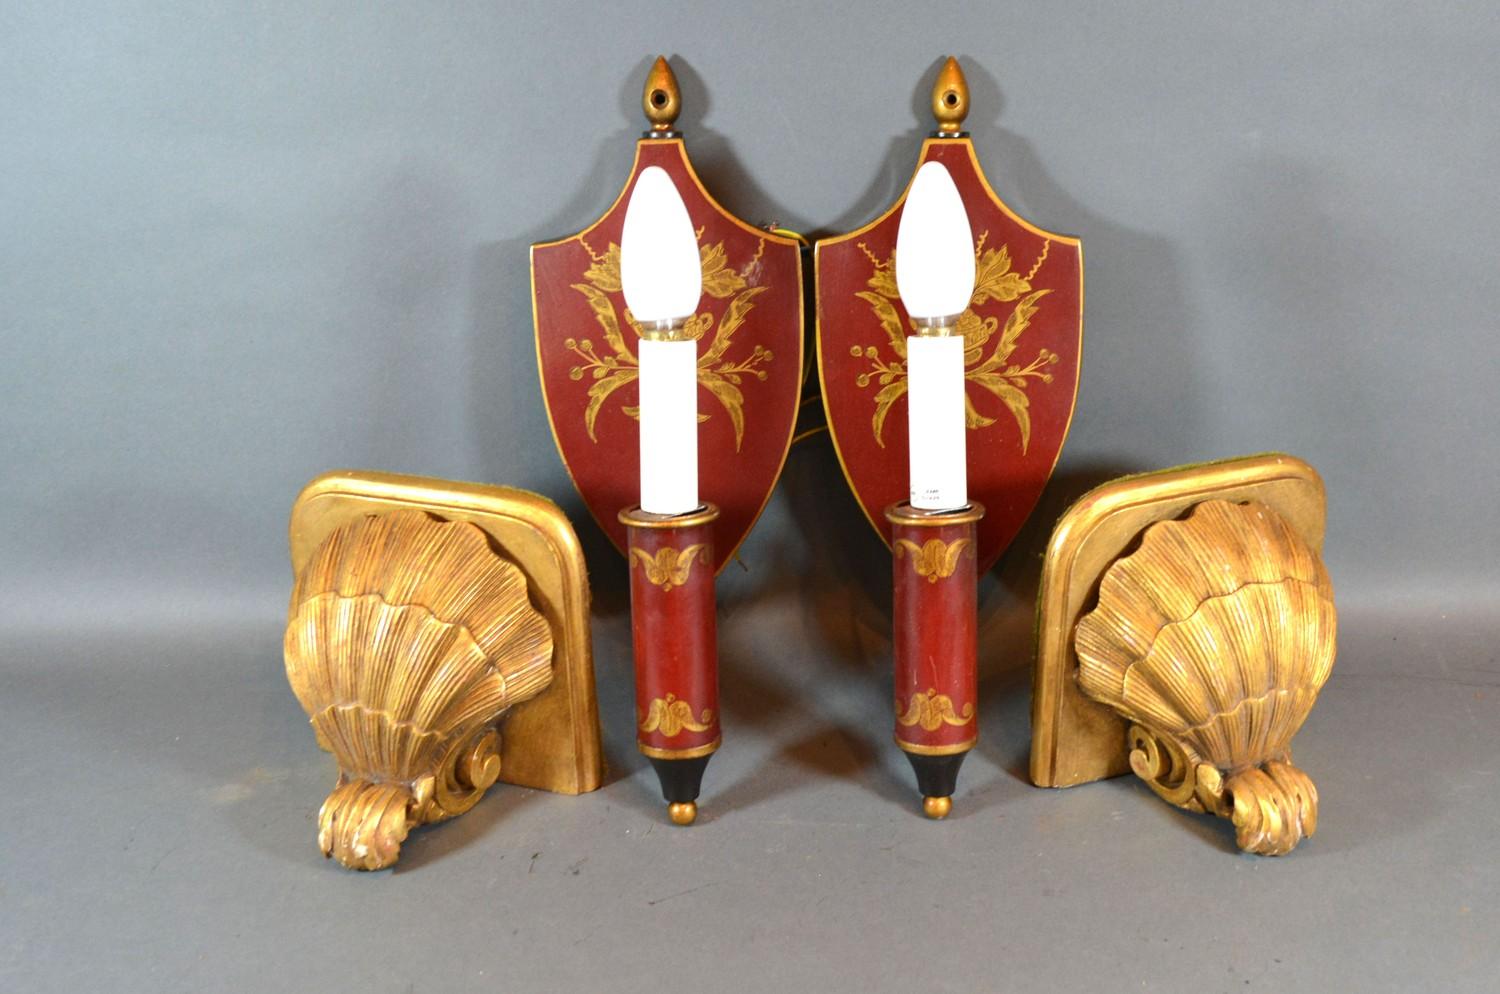 A Pair of Red Tole Ware Wall Lights, the shield back with gilt decoration and single light fitting